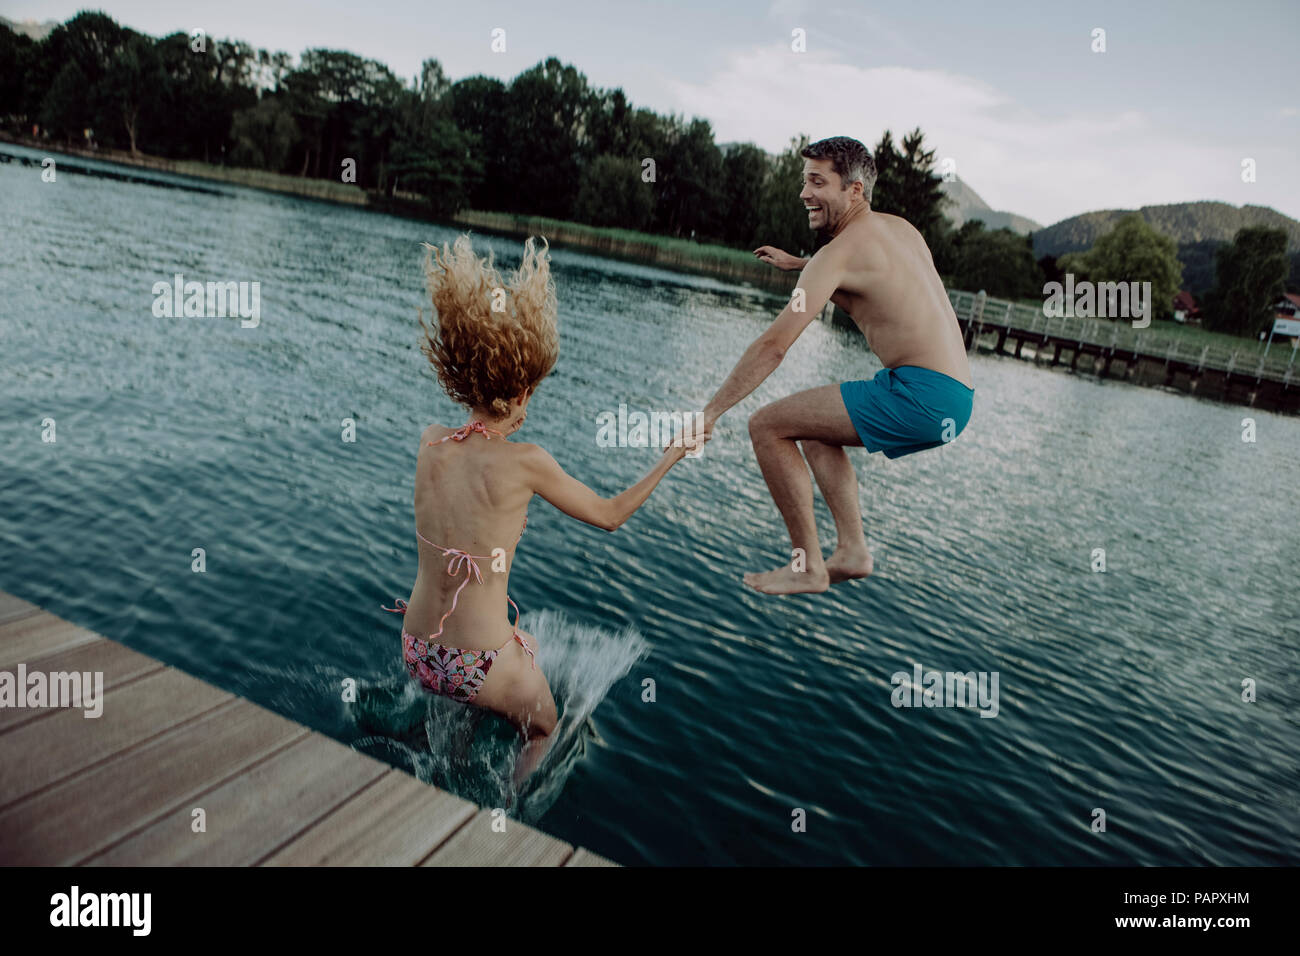 Happy couple jumping hand in hand into swimming lake Stock Photo